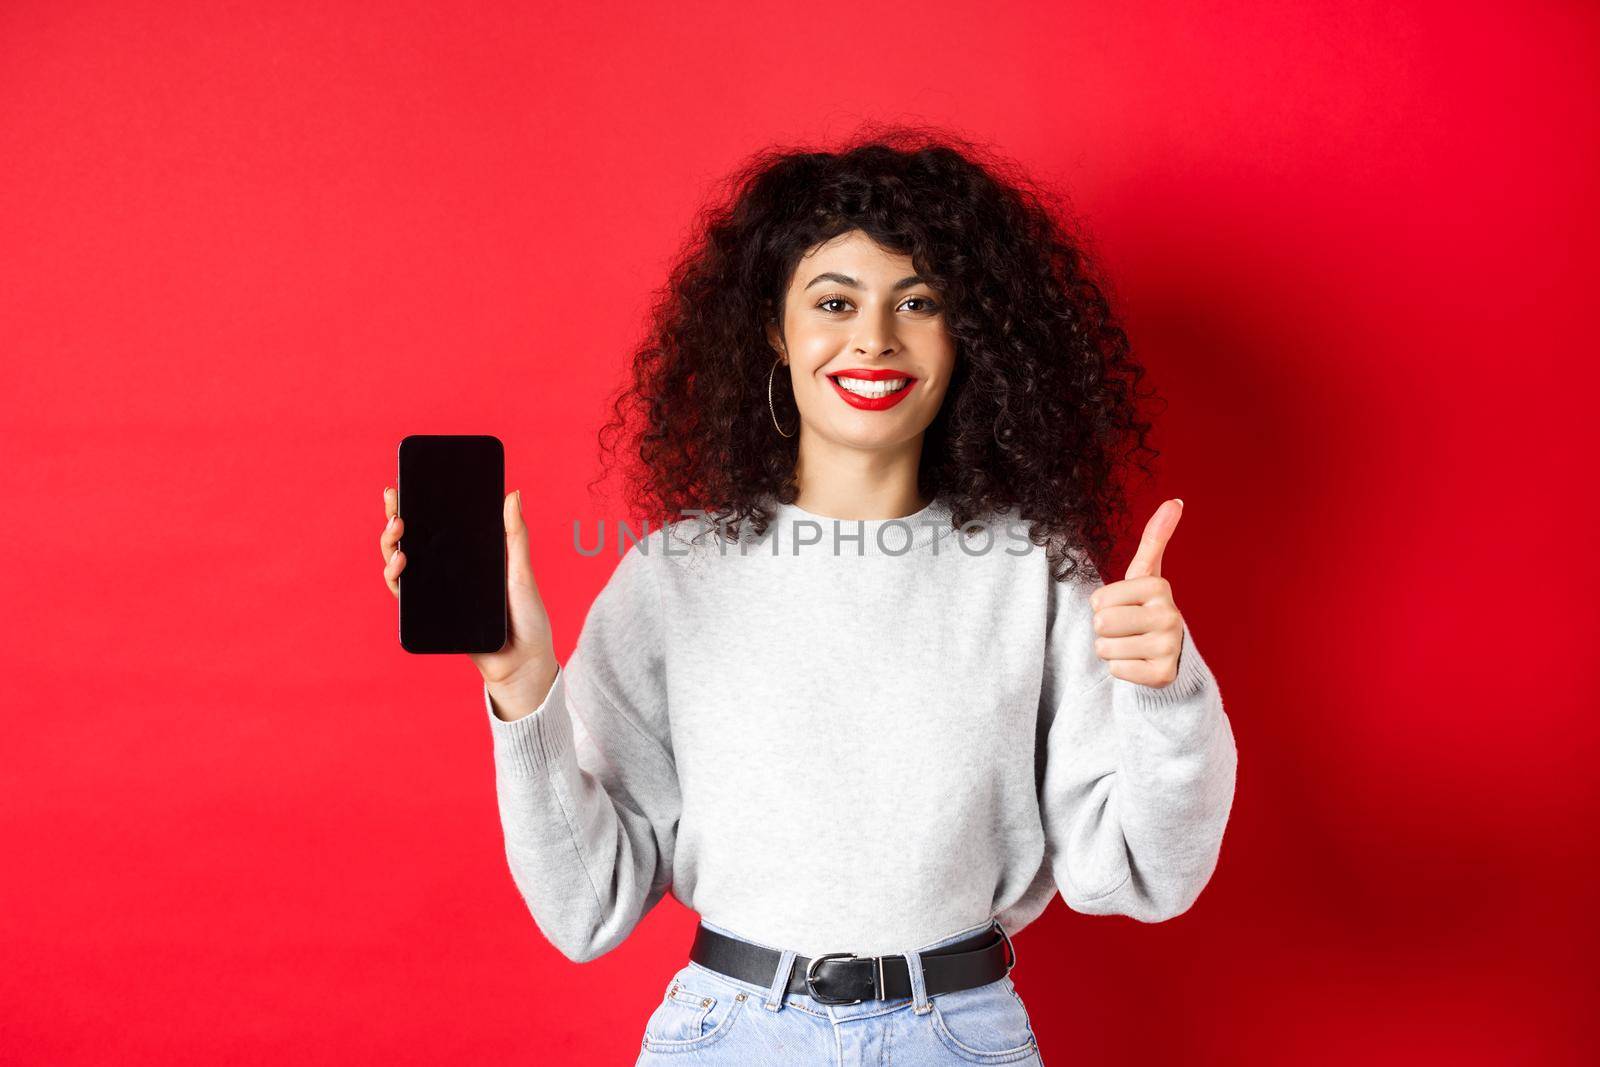 Portrait of attractive smiling woman with curly hair, showing empty mobile phone screen and thumb-up, recommending online promo, standing on red background.